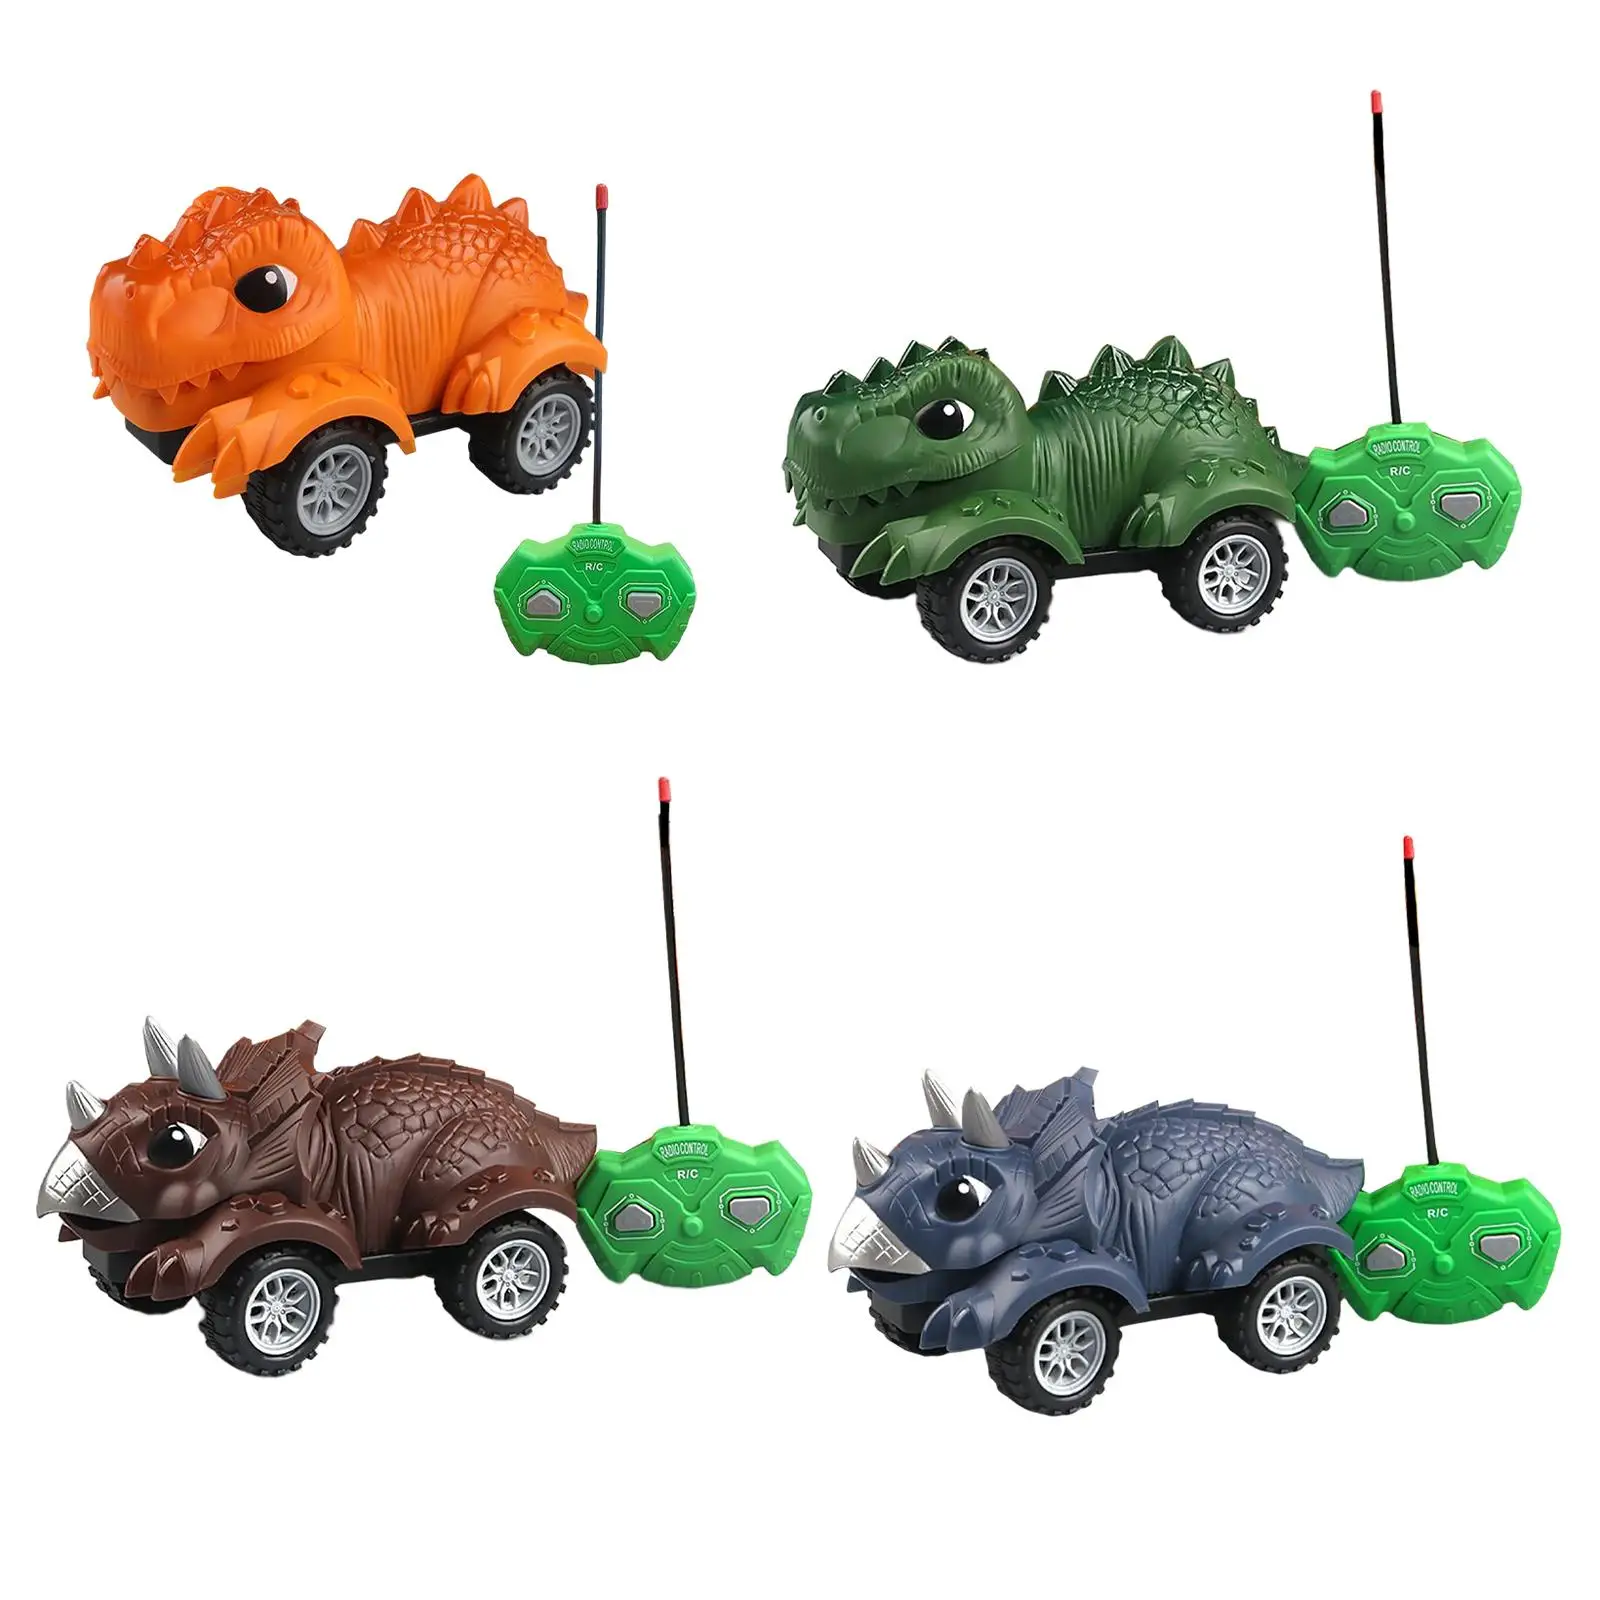 Fun Dinosaur Toy car Trucks Learning Educational Toys Battery Operated Toy Vehicle for Christmas Gifts Party Favors Boys